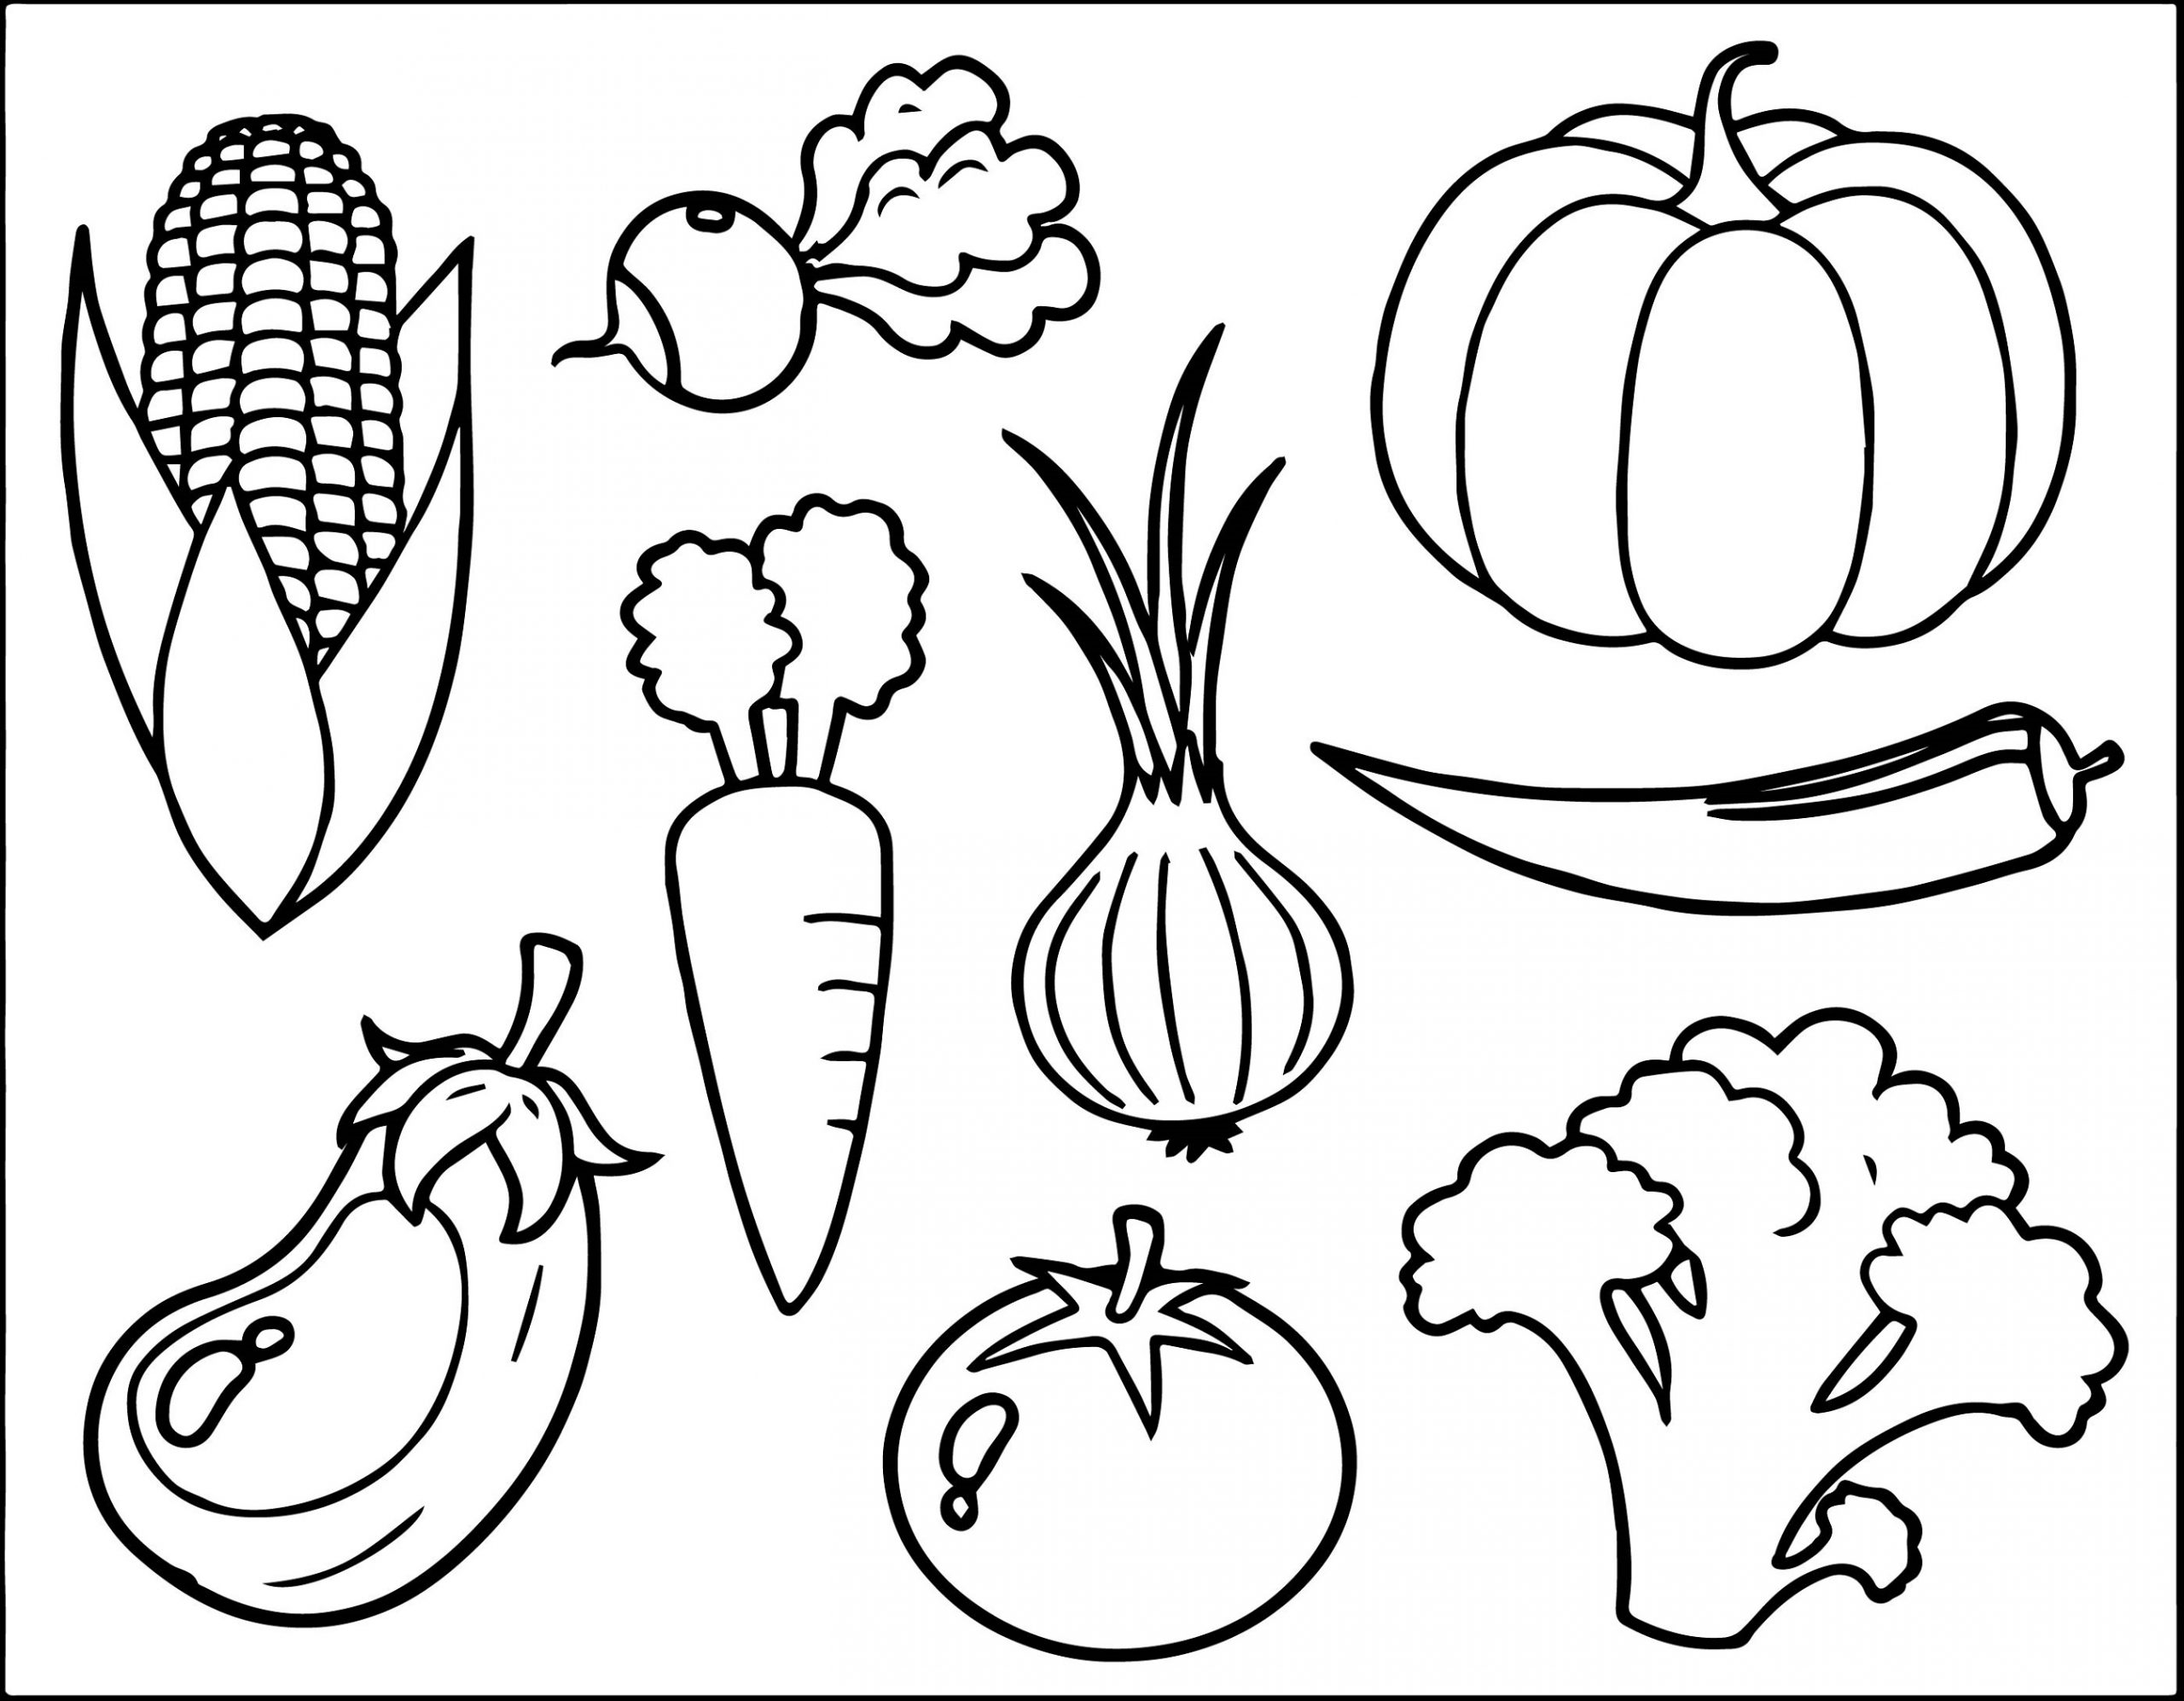 Colouring Pictures for Toddlers Vegetables